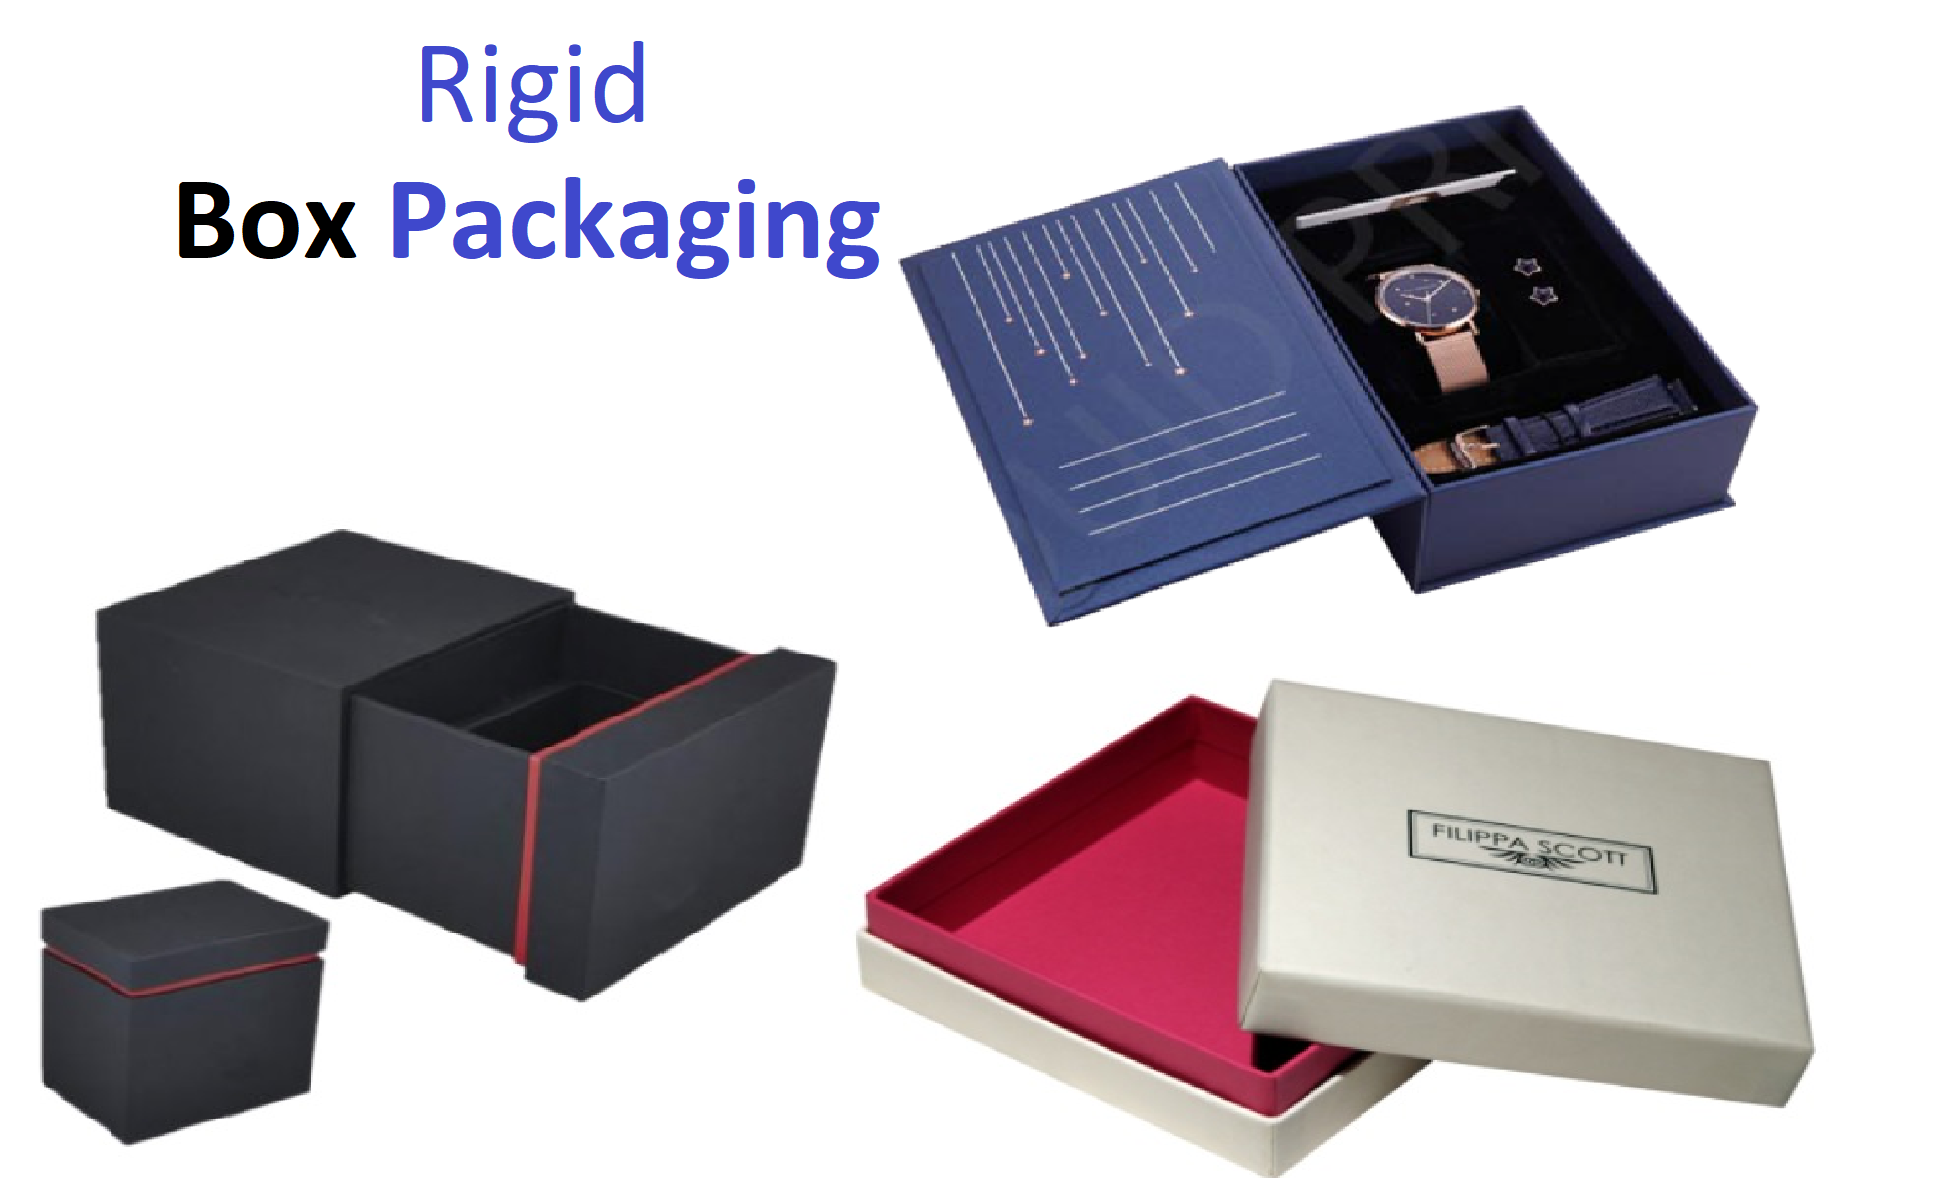 What are the salient features of rigid packaging material?